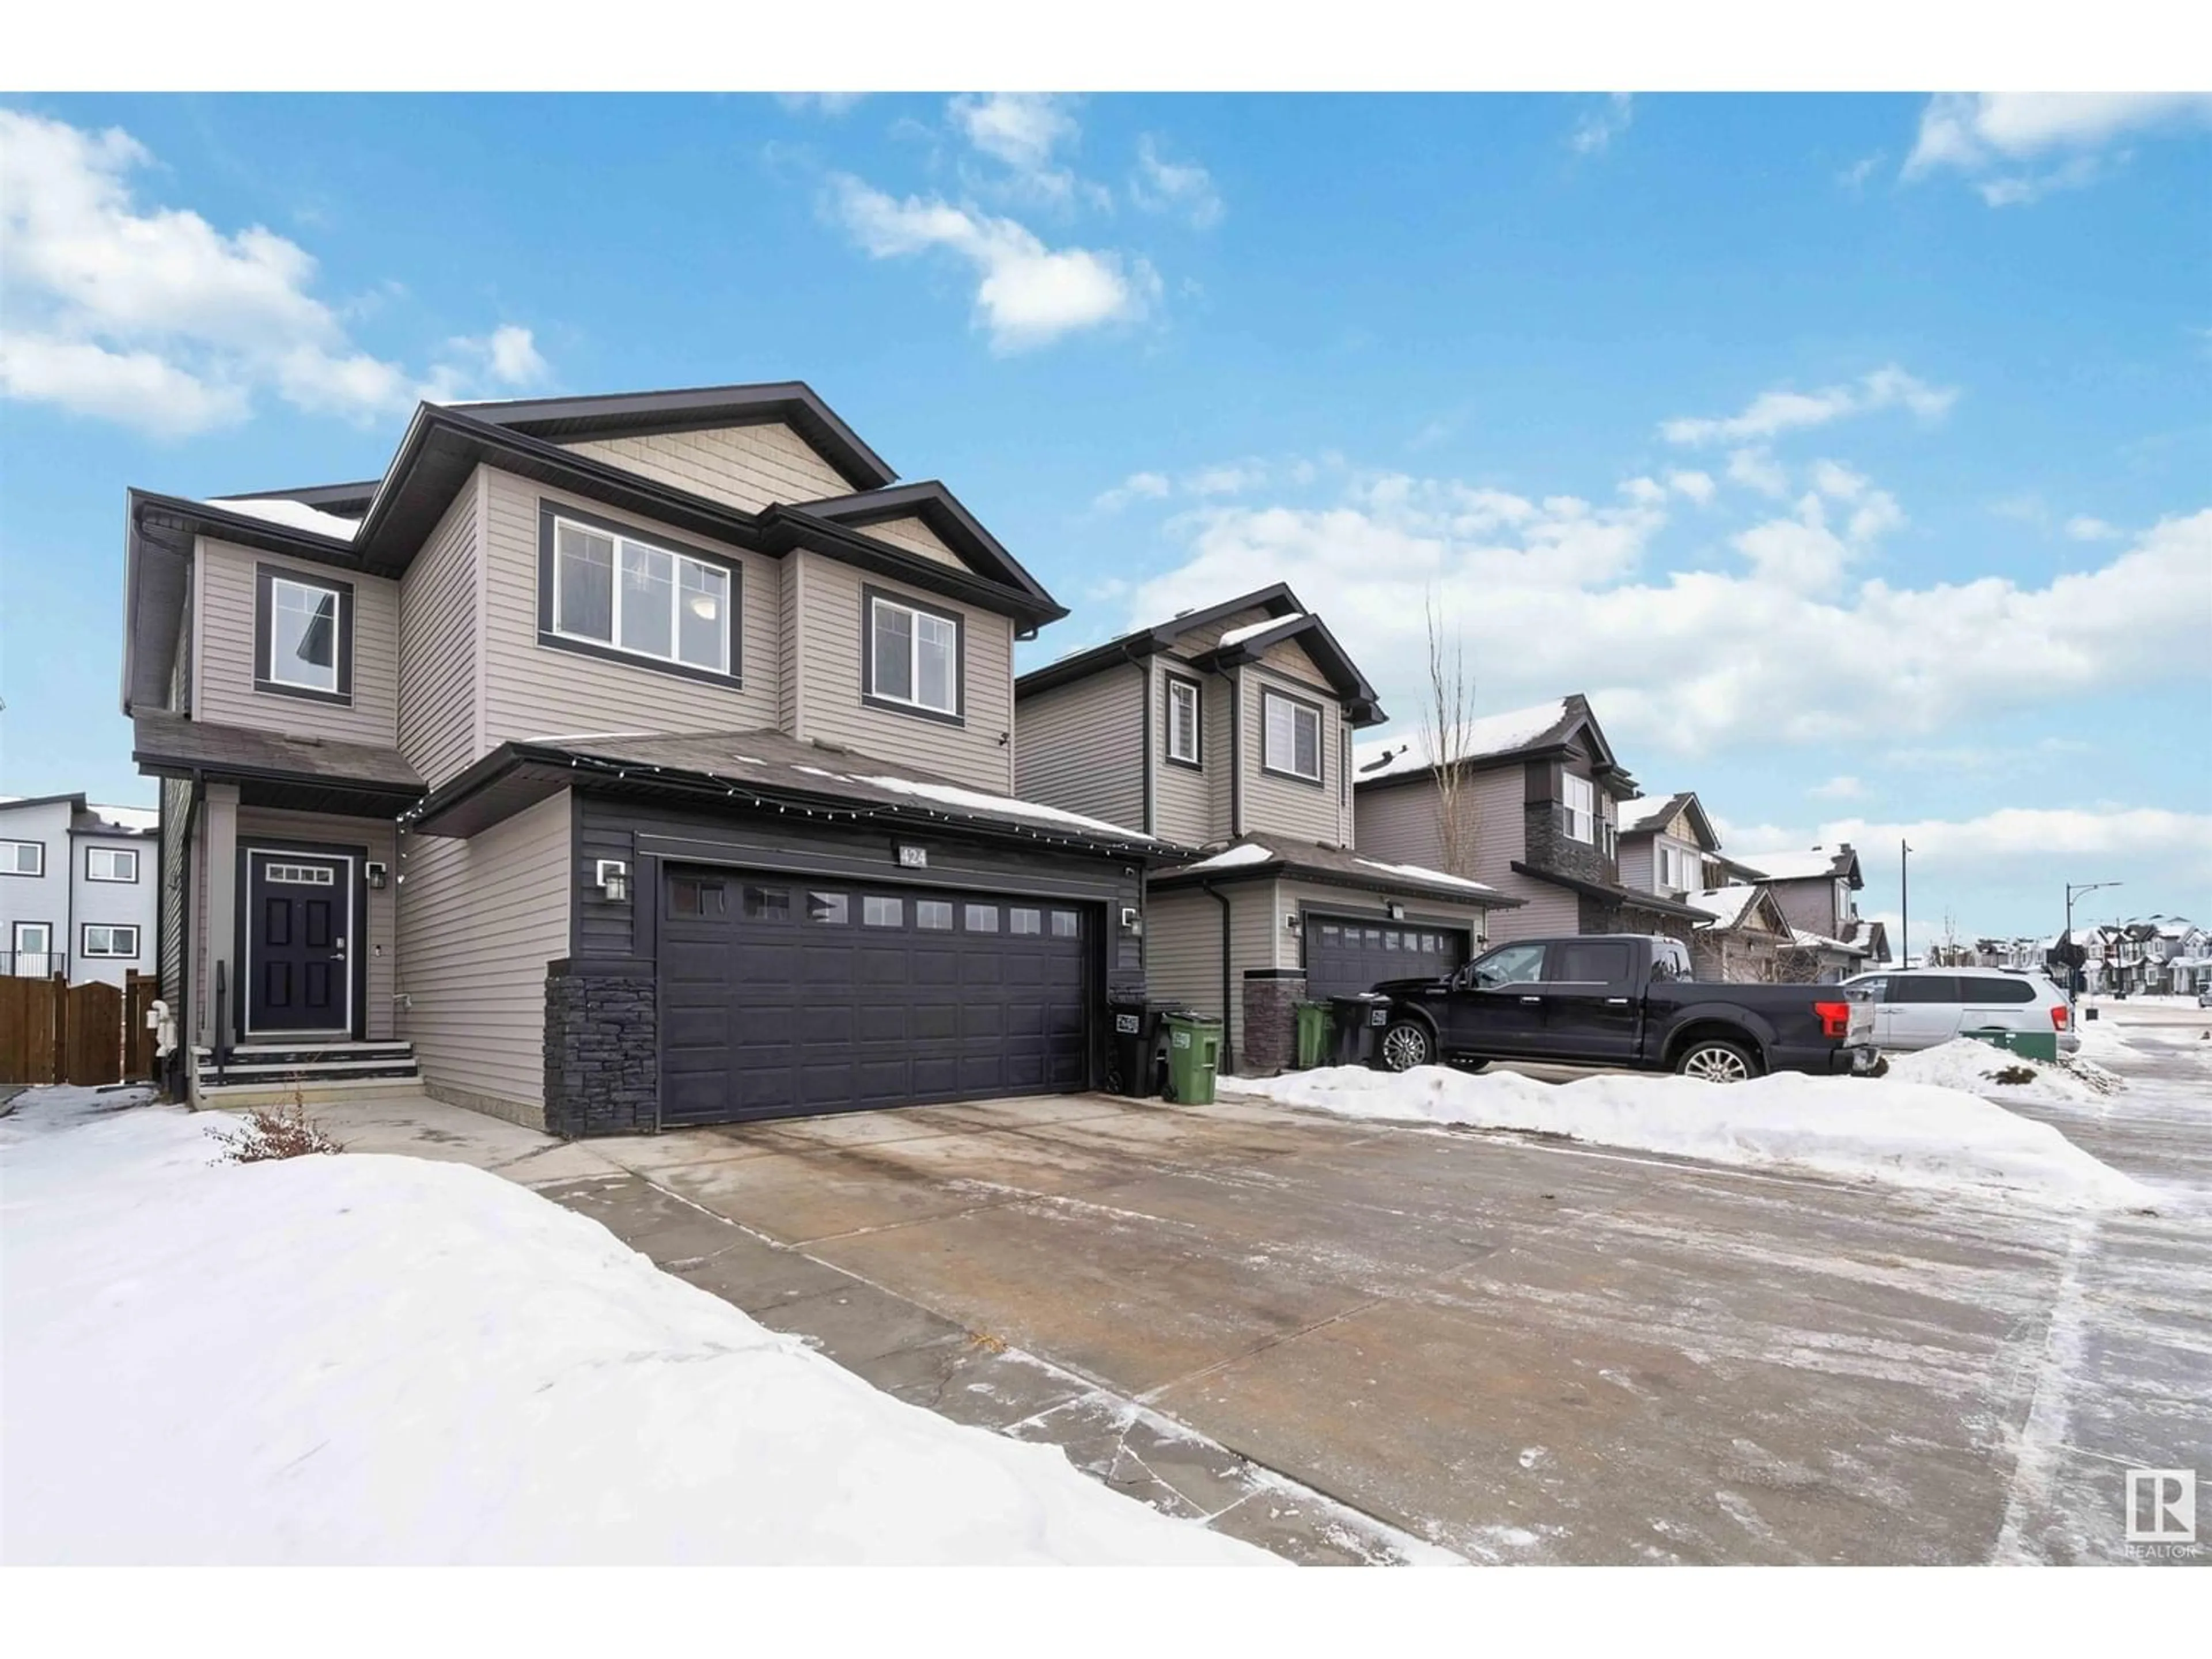 A pic from exterior of the house or condo for 424 42 AV NW, Edmonton Alberta T6T2G1